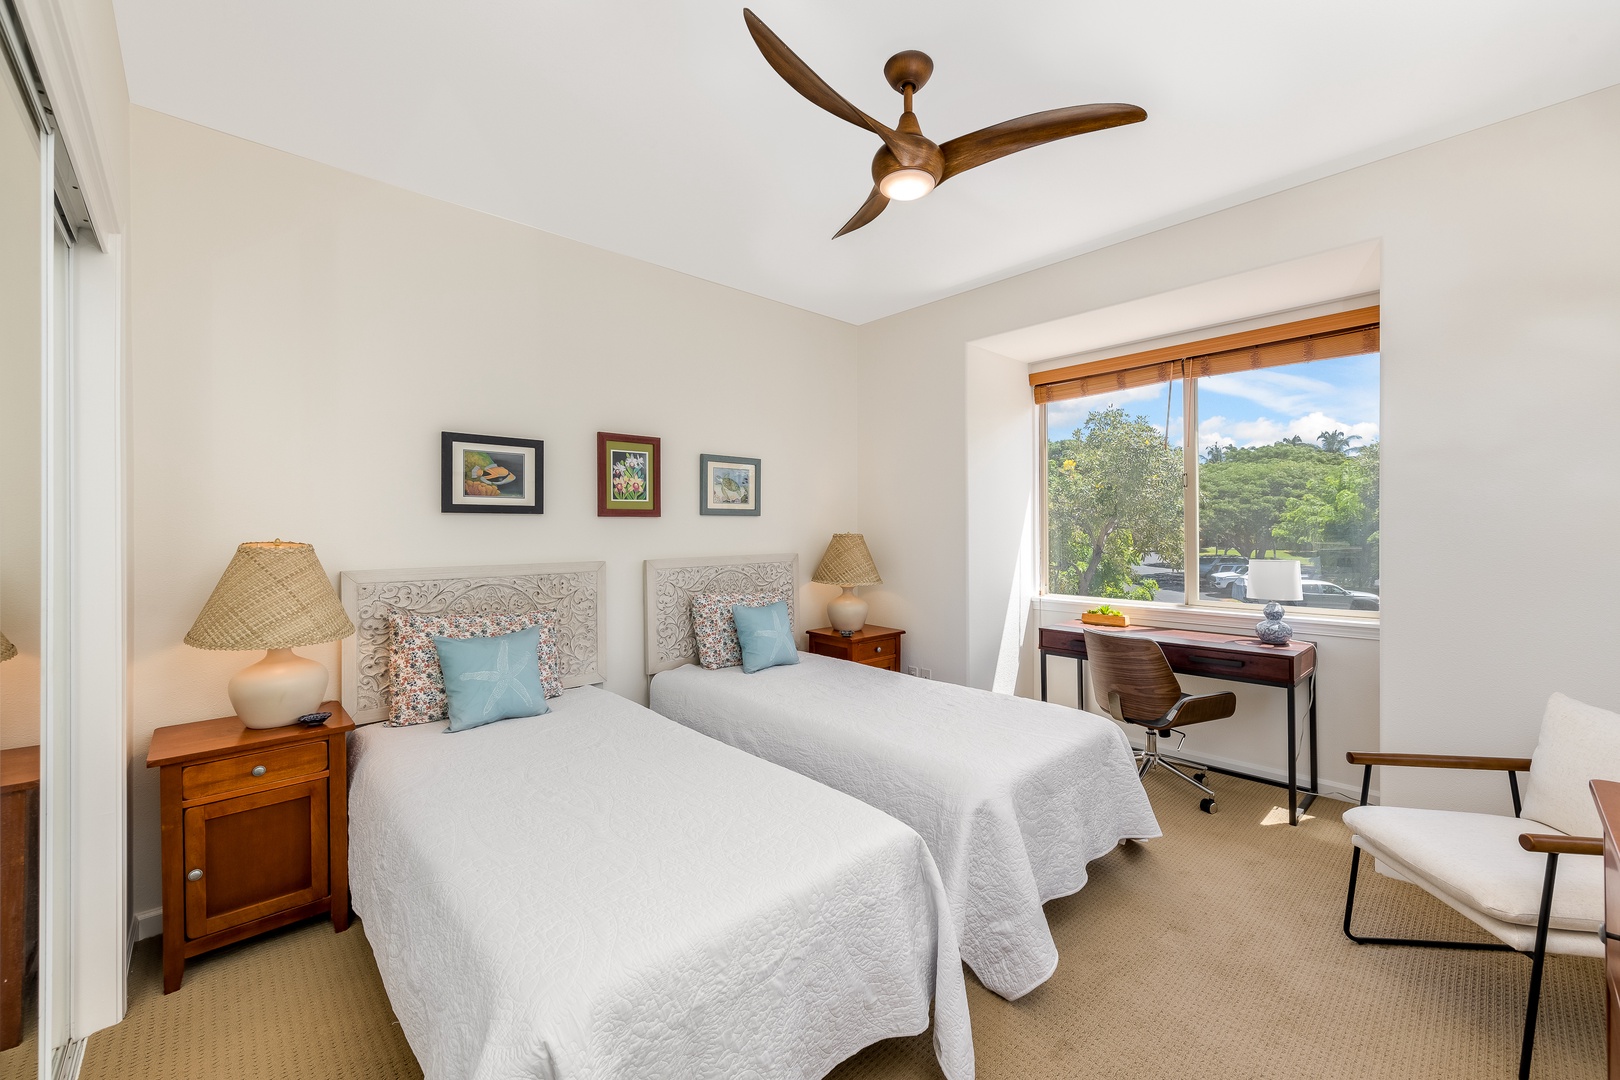 Kamuela Vacation Rentals, Mauna Lani Fairways #603 - XL twin beds, feels both intimate and airy. A workspace window nook provides a desk and a lovely view out over the treetops.